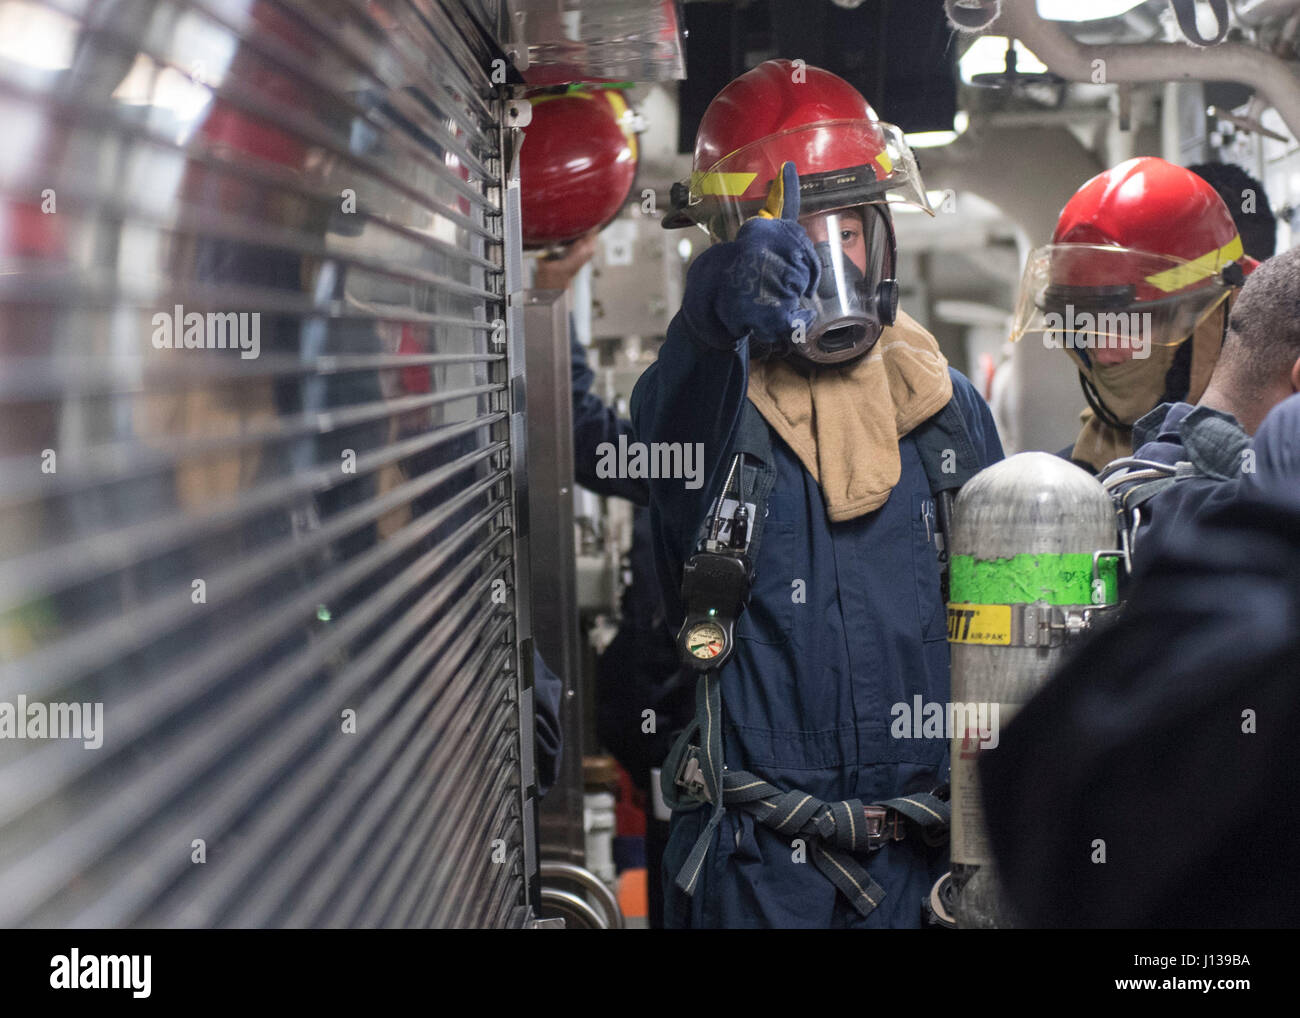 170410-N-PP996-013  SOUTH CHINA SEA (April 10, 2017) Gas Turbine System Technician (Mechanical) 3rd Class Jesse Maples, from San Simone, Ariz., gives a thumbs up during a damage control drill aboard the Arleigh Burke-class guided-missile destroyer USS Michael Murphy (DDG 112). Michael Murphy is on a scheduled western Pacific deployment with the Carl Vinson Carrier Strike Group as part of the U.S. Pacific Fleet-led initiative to extend the command and control functions of U.S. 3rd Fleet. U.S. Navy aircraft carrier strike groups have patrolled the Indo-Asia-Pacific regularly and routinely for mo Stock Photo